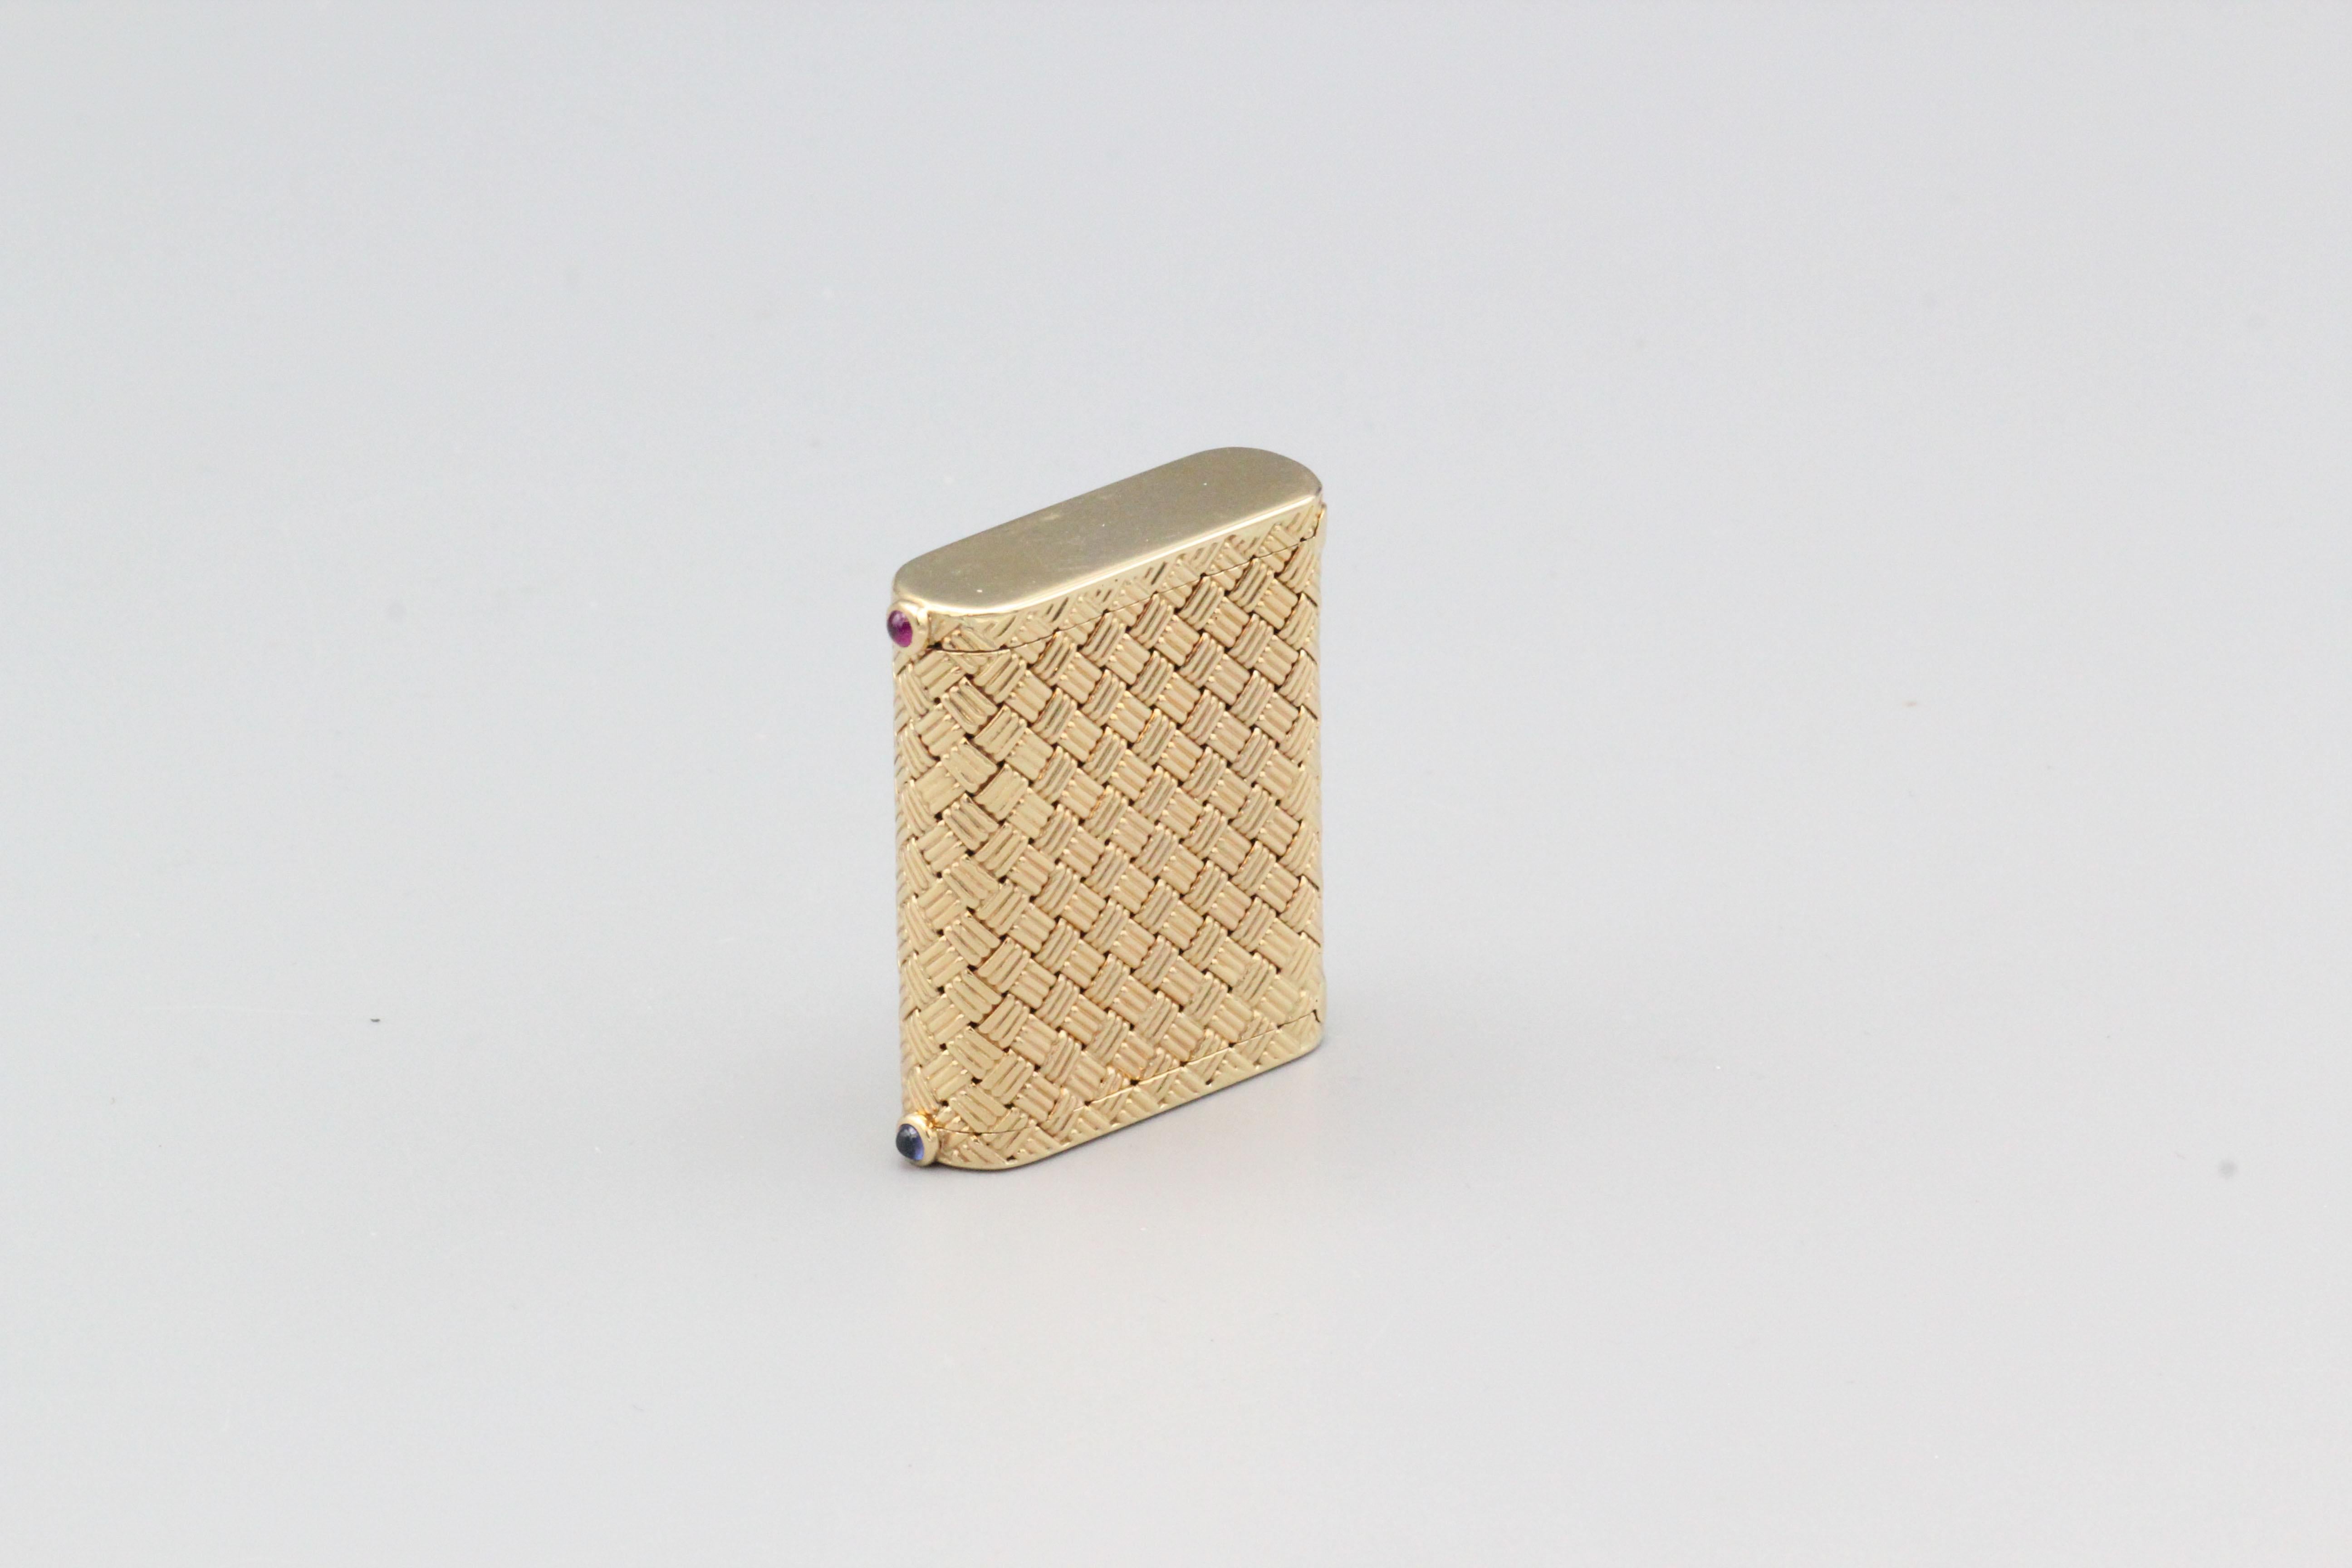 Fine 2 section 14k yellow gold basket weave pill box with ruby and sapphire cabochons, by Tiffany & Co. circa 1950s.

This Tiffany & Co. pill box is an elegant and functional piece of vintage jewelry. This pill box is crafted from high-quality 14k